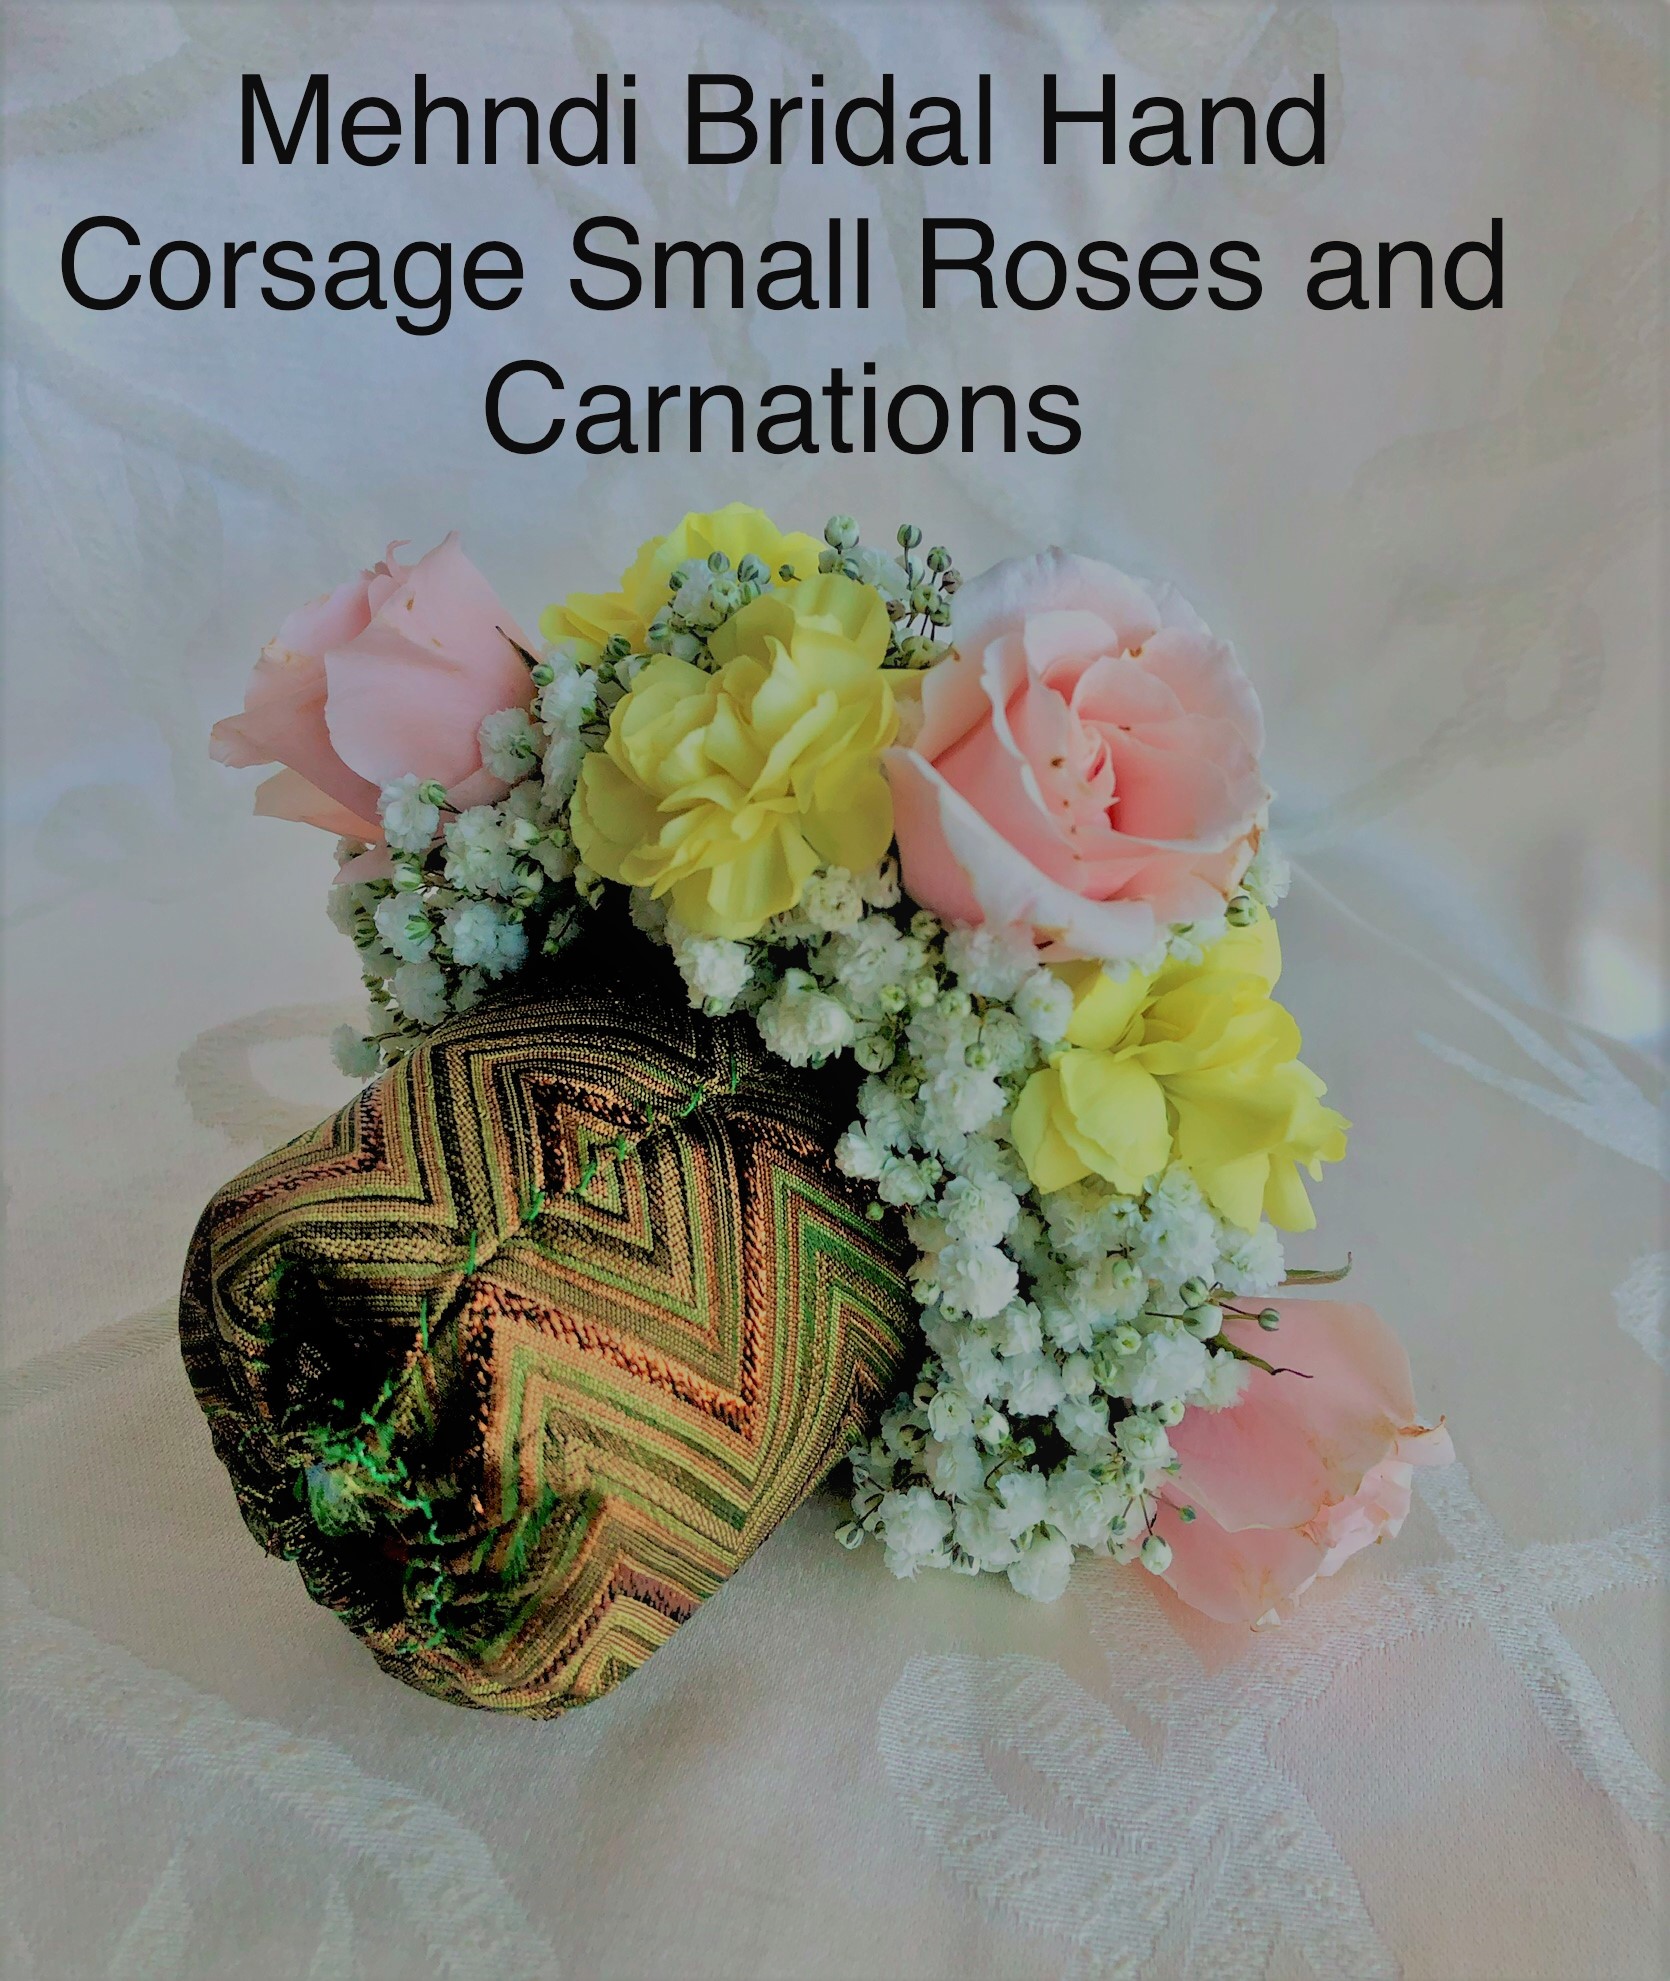 $27.50 each - Bridal Mehndi Hand Corsage Small Roses and Carnations 